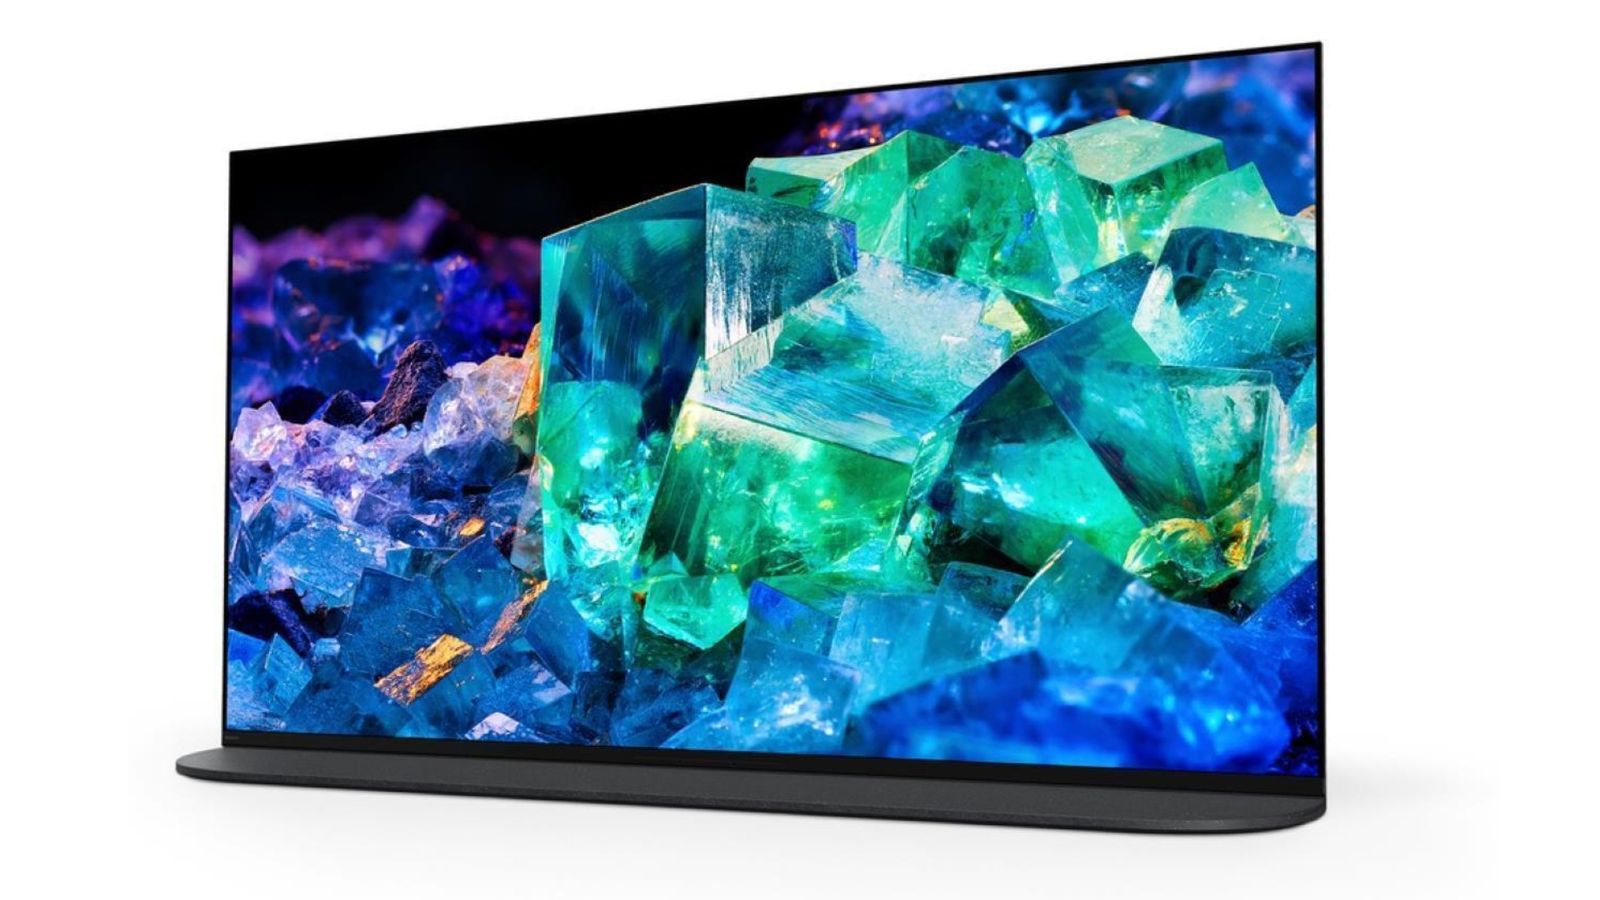 Best TV brands - Sony A95K product image of a black TV featuring a turquoise and blue crystals on the display.